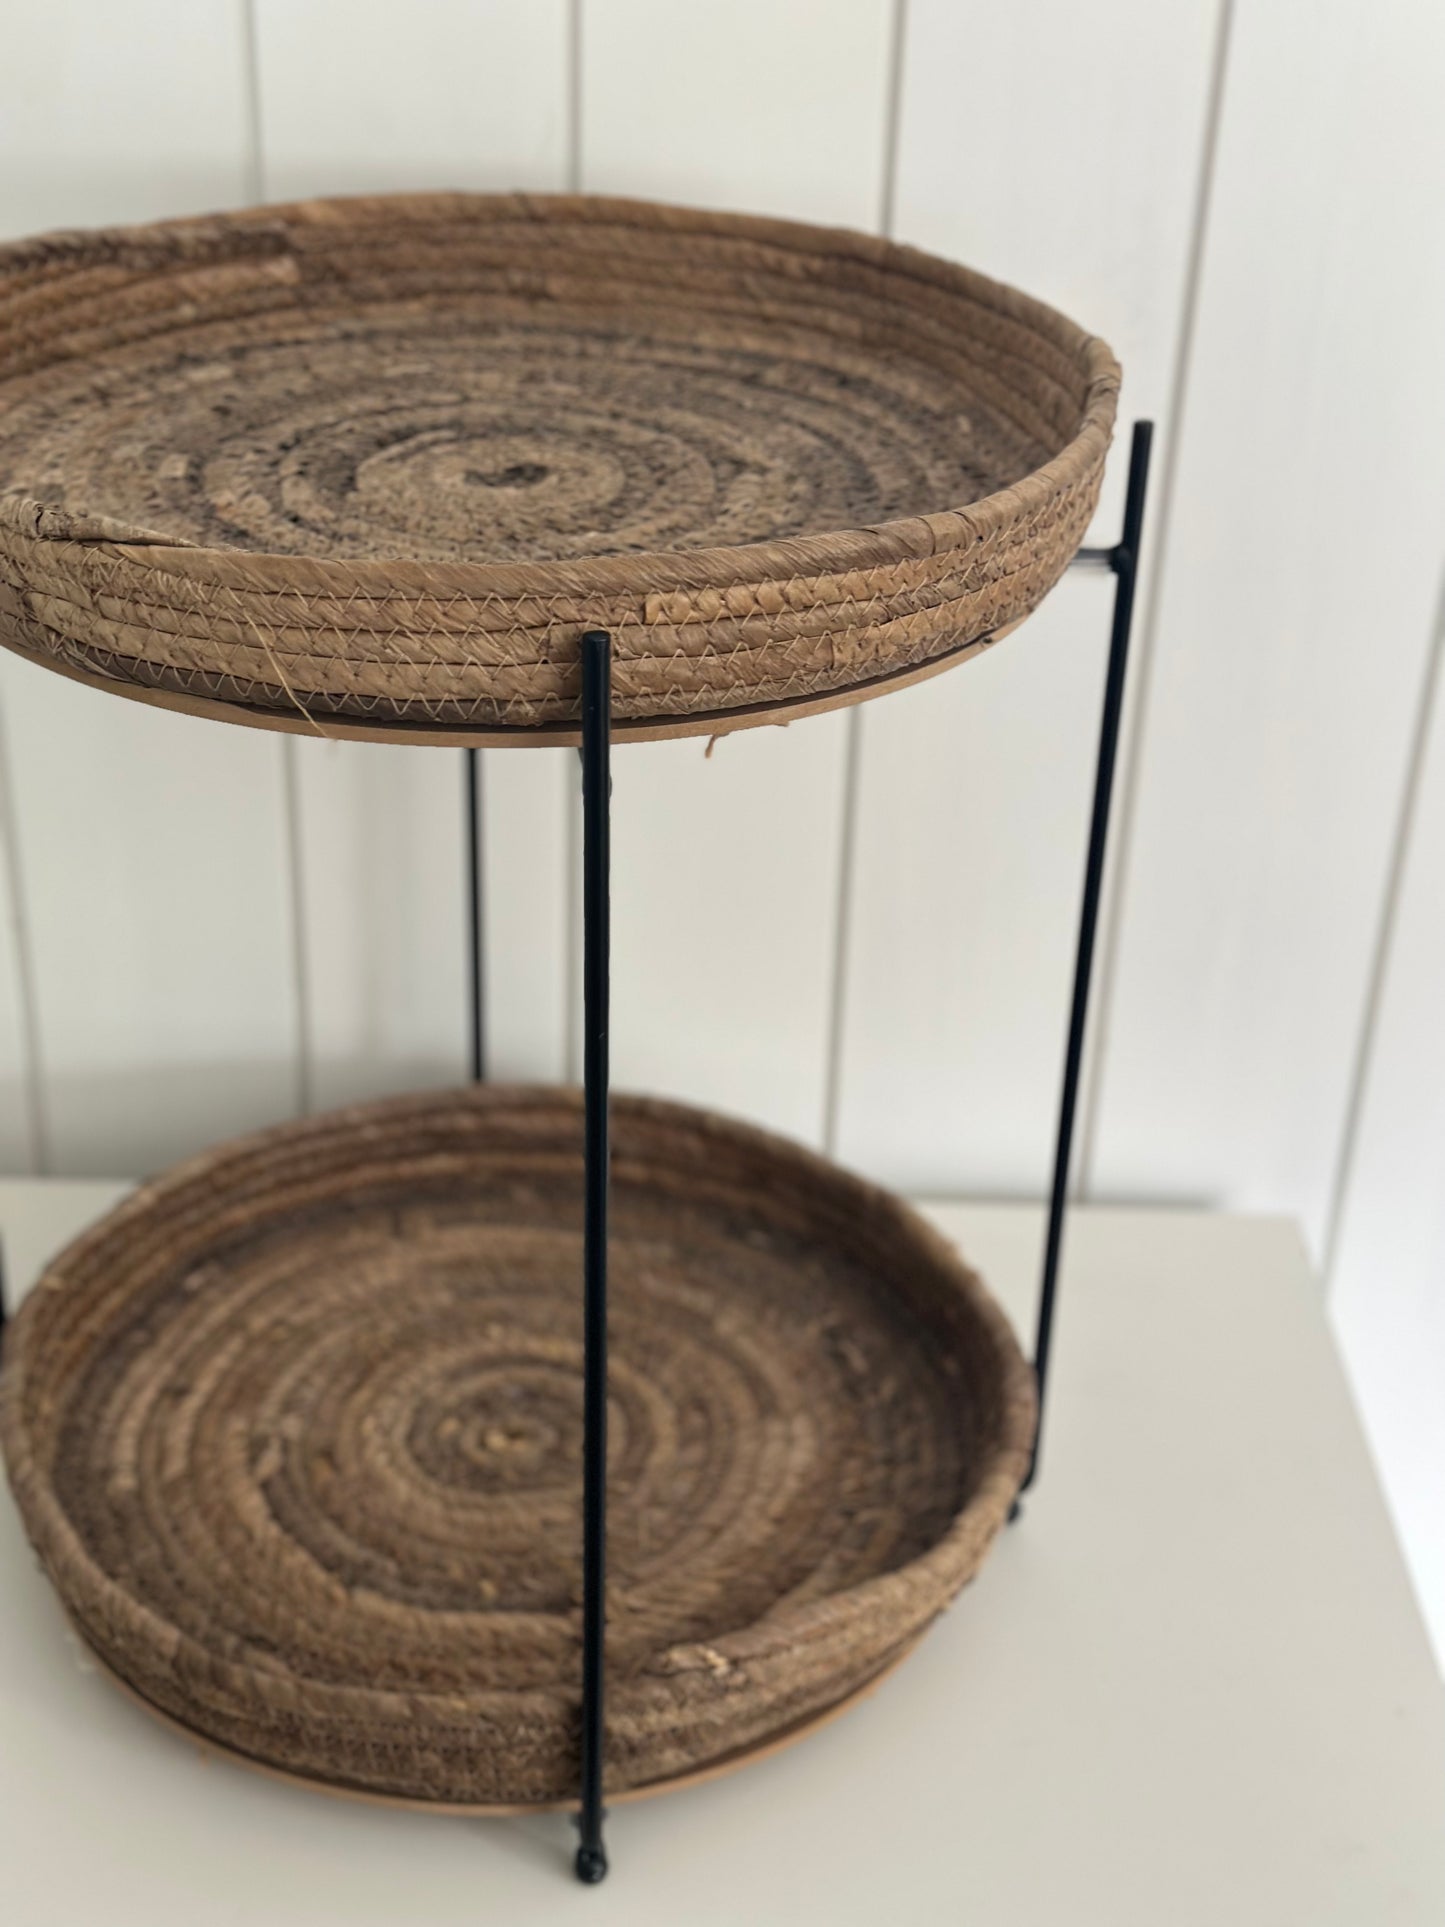 Woven two layered side table